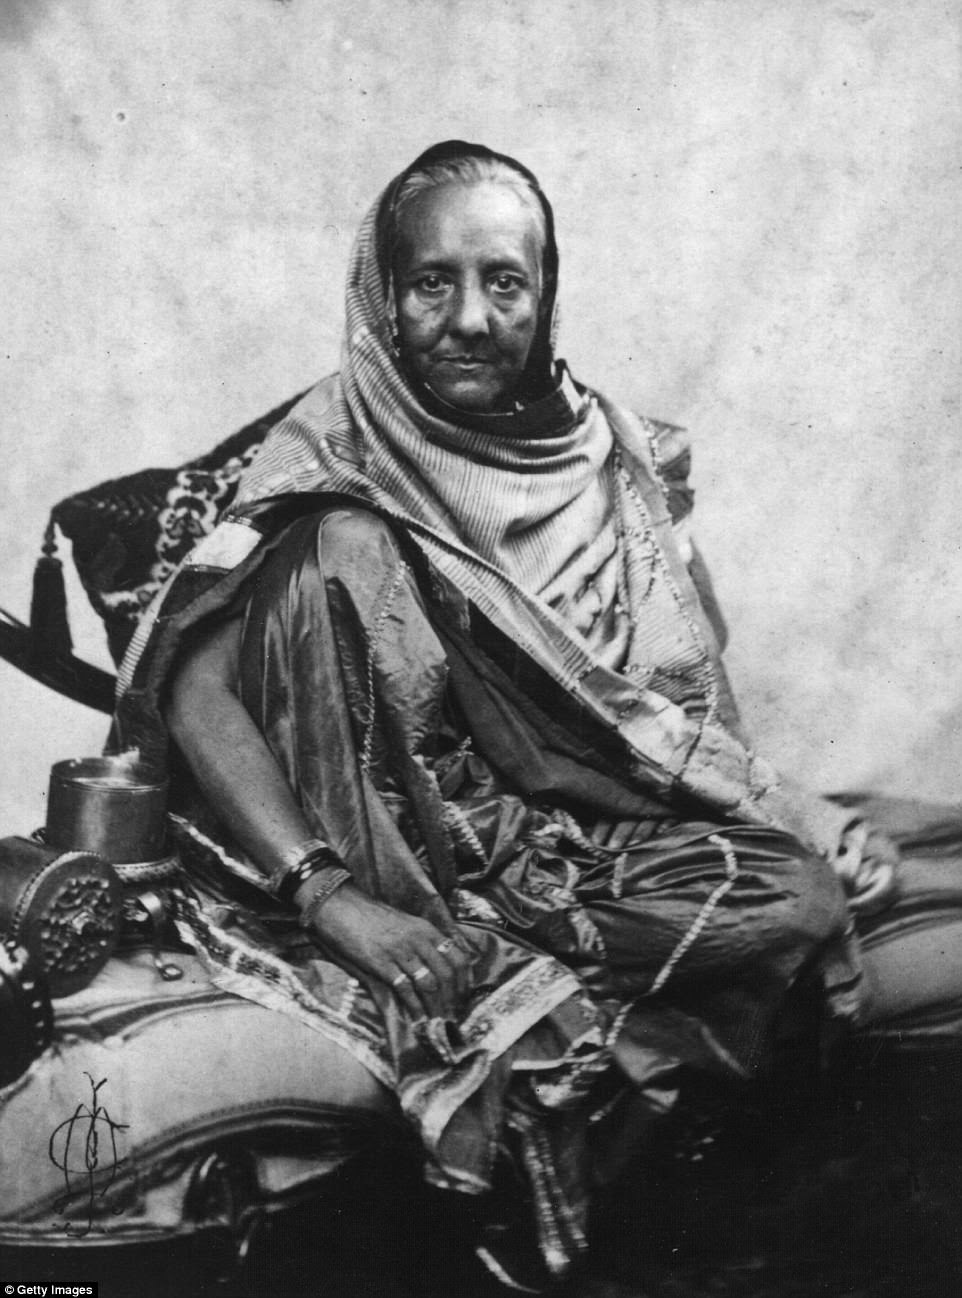 Begum Zenat Mahat, who was wife to the Shah of Dehli Wajid Ali Shah, was exiled to Rangoon after the Indian Rebellion of 1857